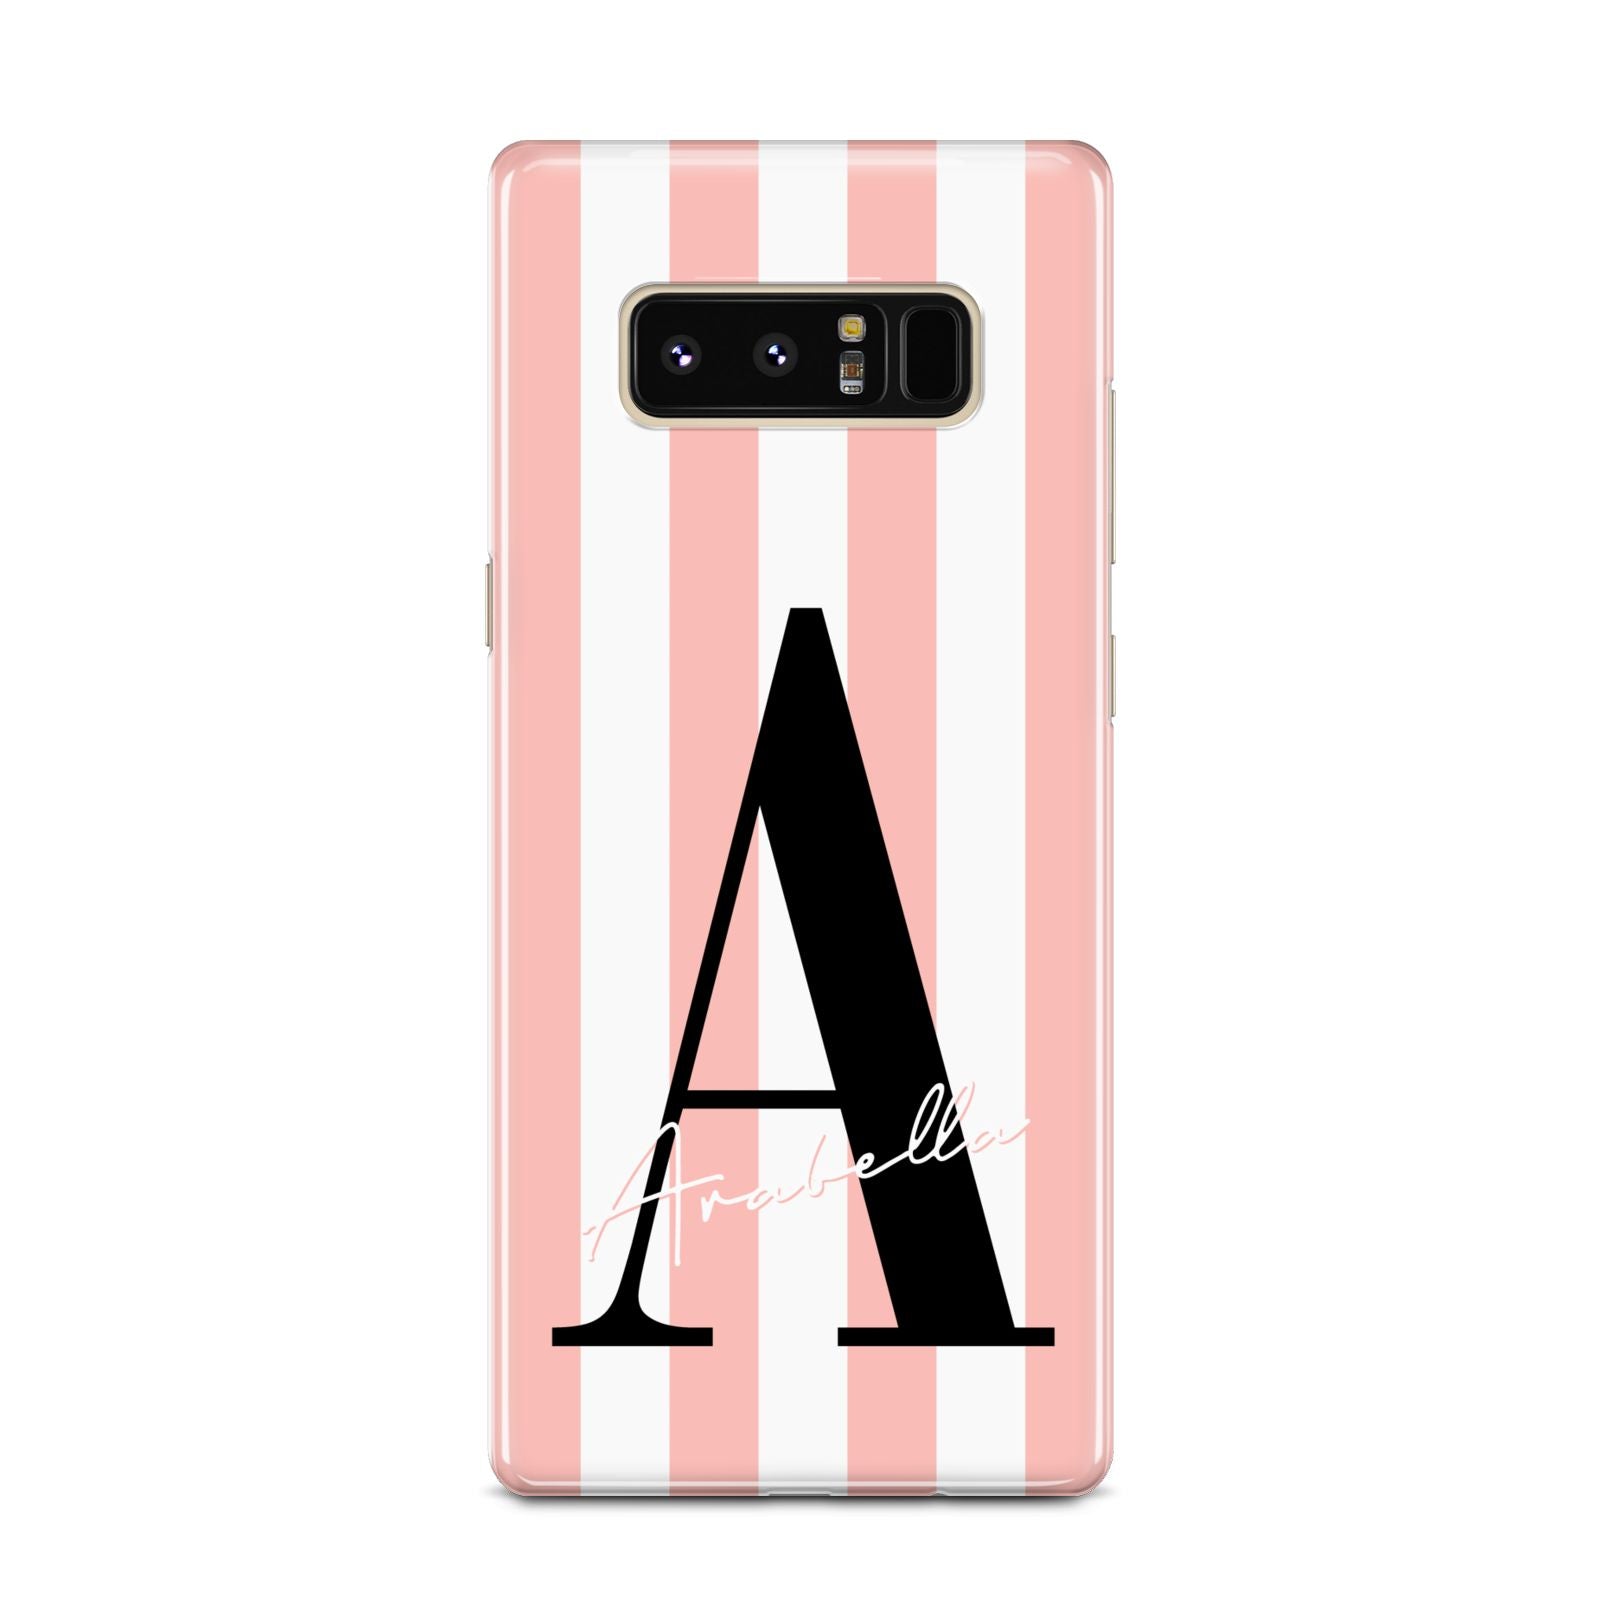 Personalised Pink Striped Initial Samsung Galaxy Note 8 Case